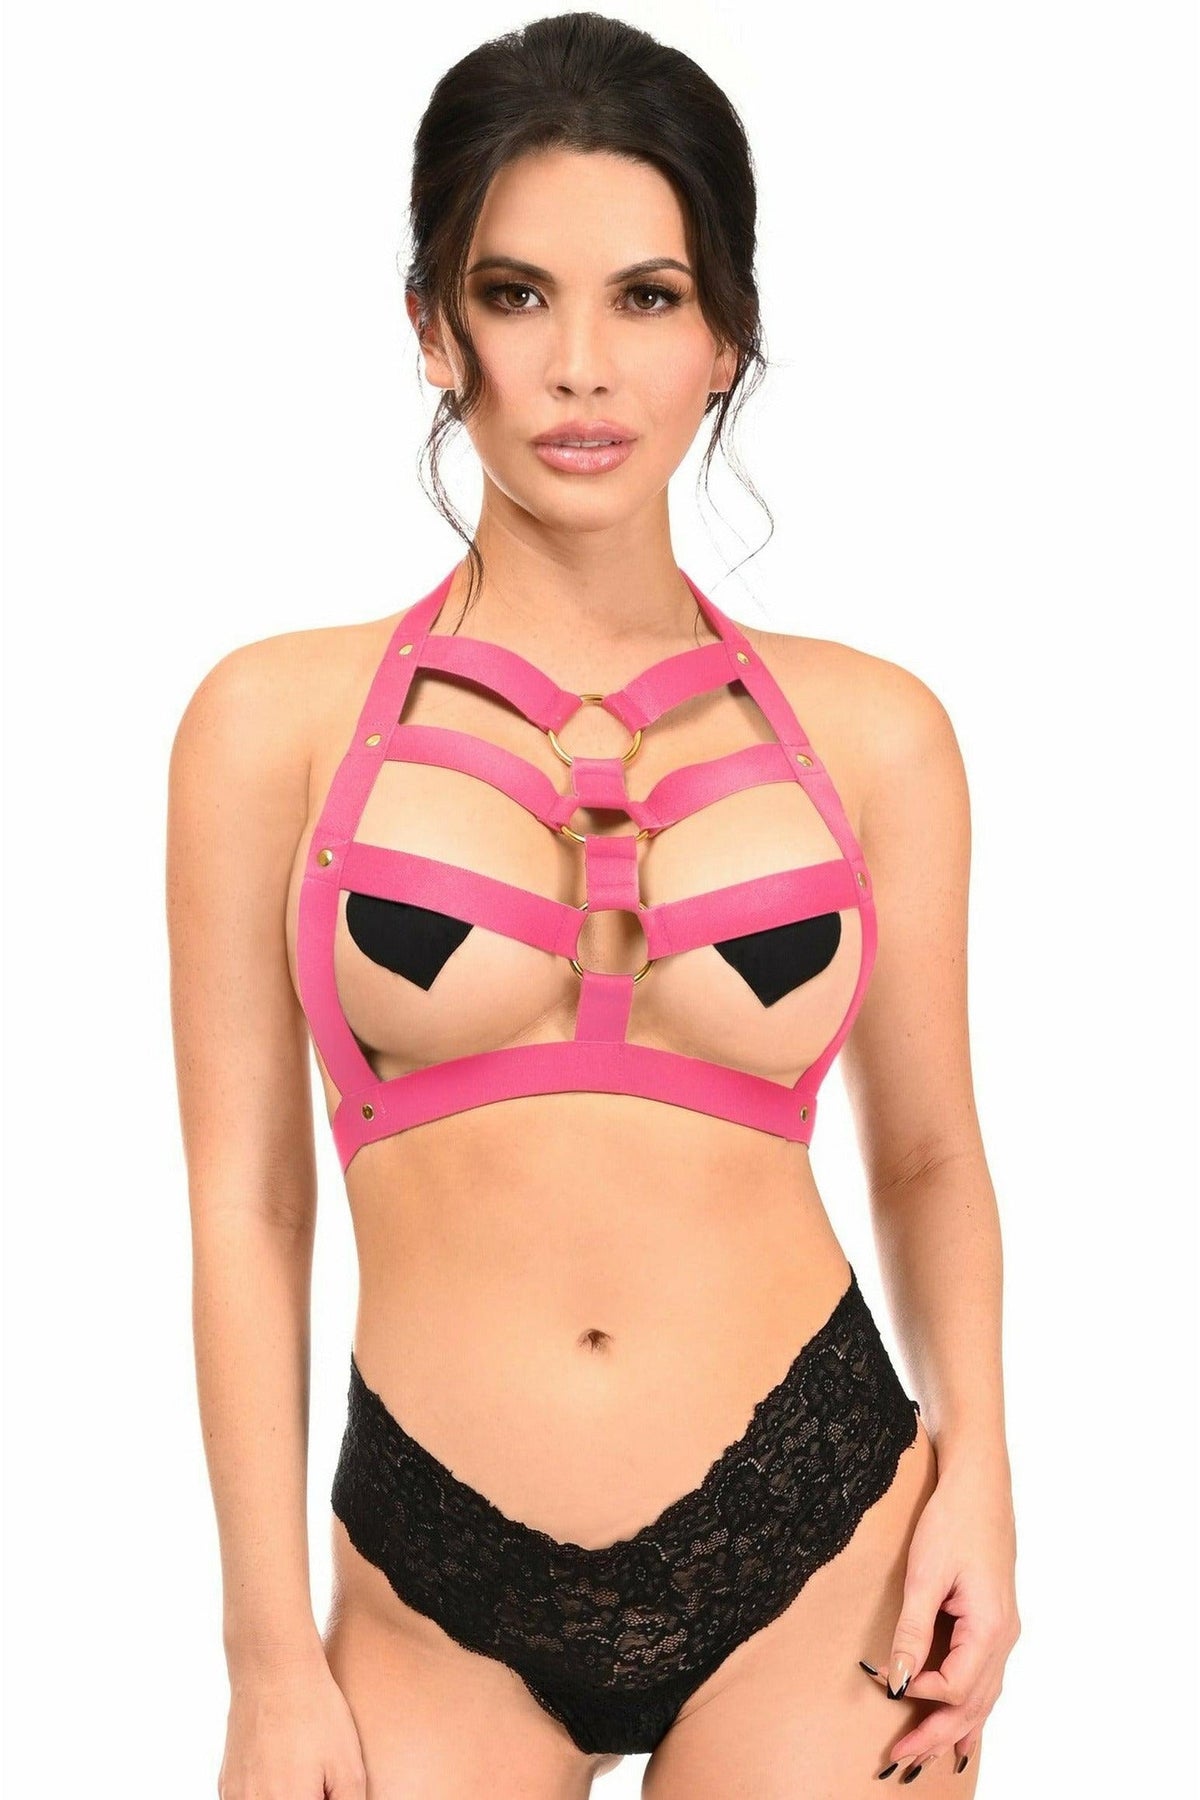 BOXED Hot Pink Stretchy Body Harness w/Gold Hardware-Daisy Corsets